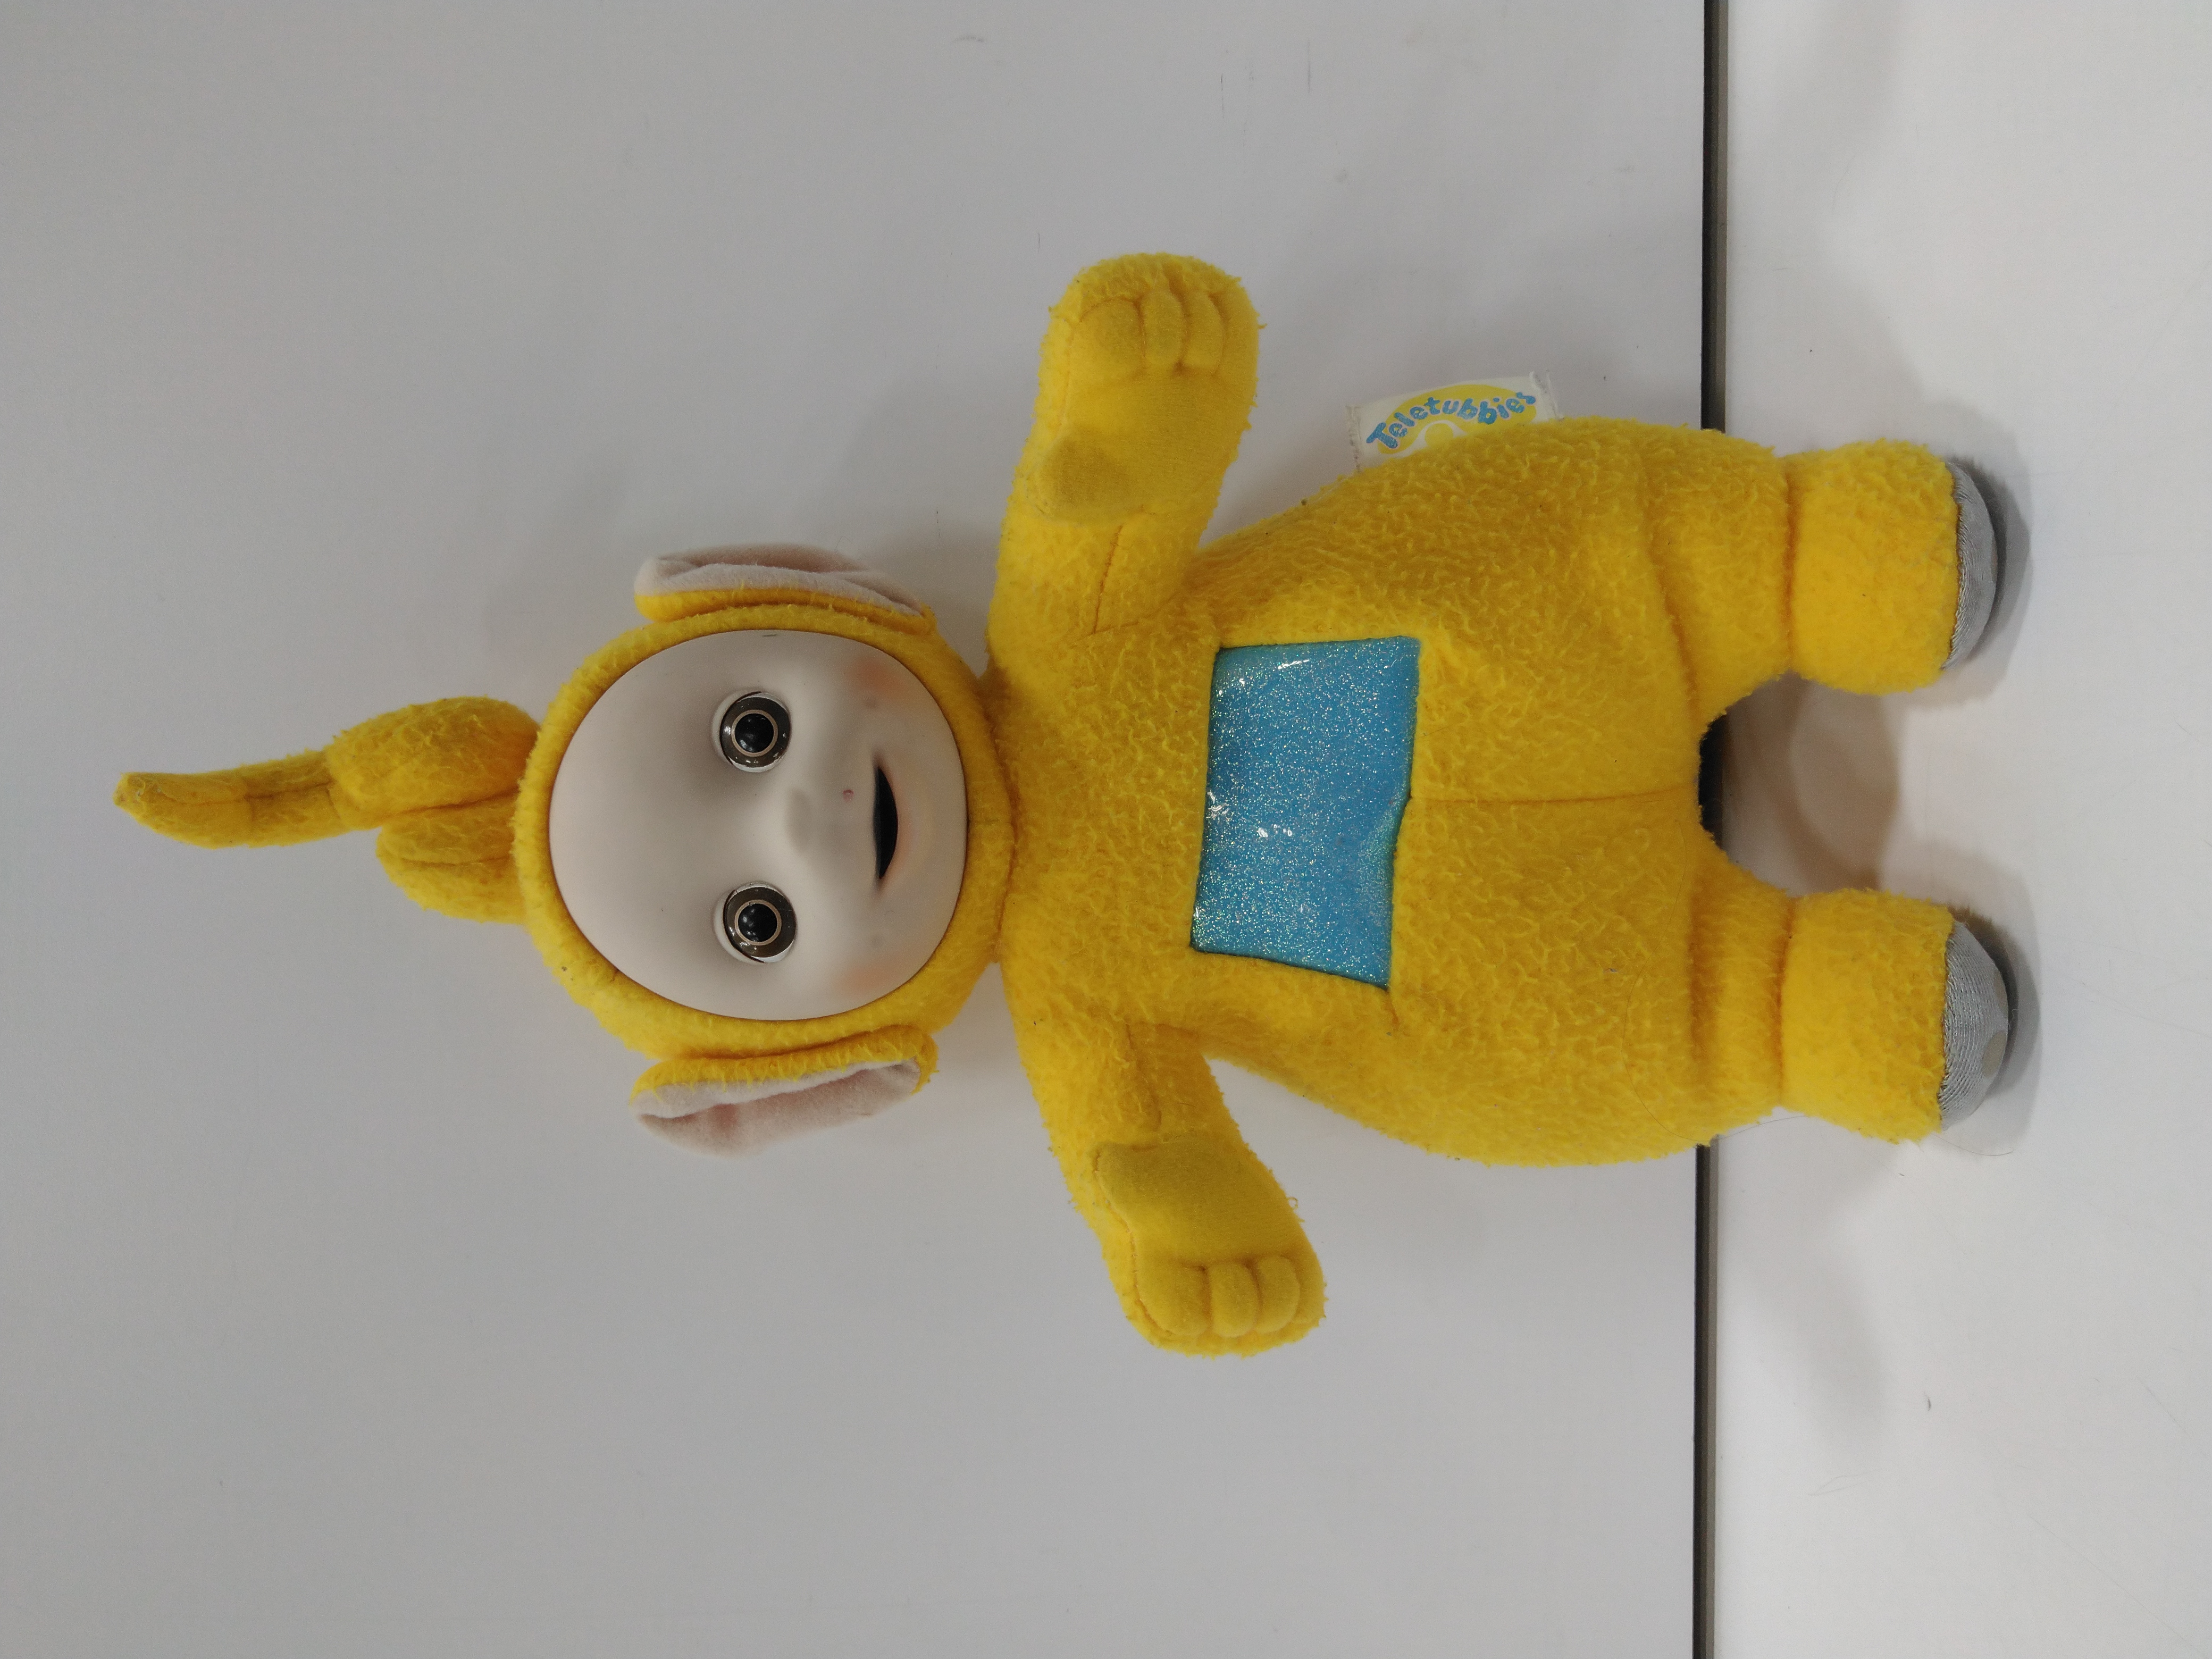 Buy the Vintage Teletubbies Plush Doll | GoodwillFinds